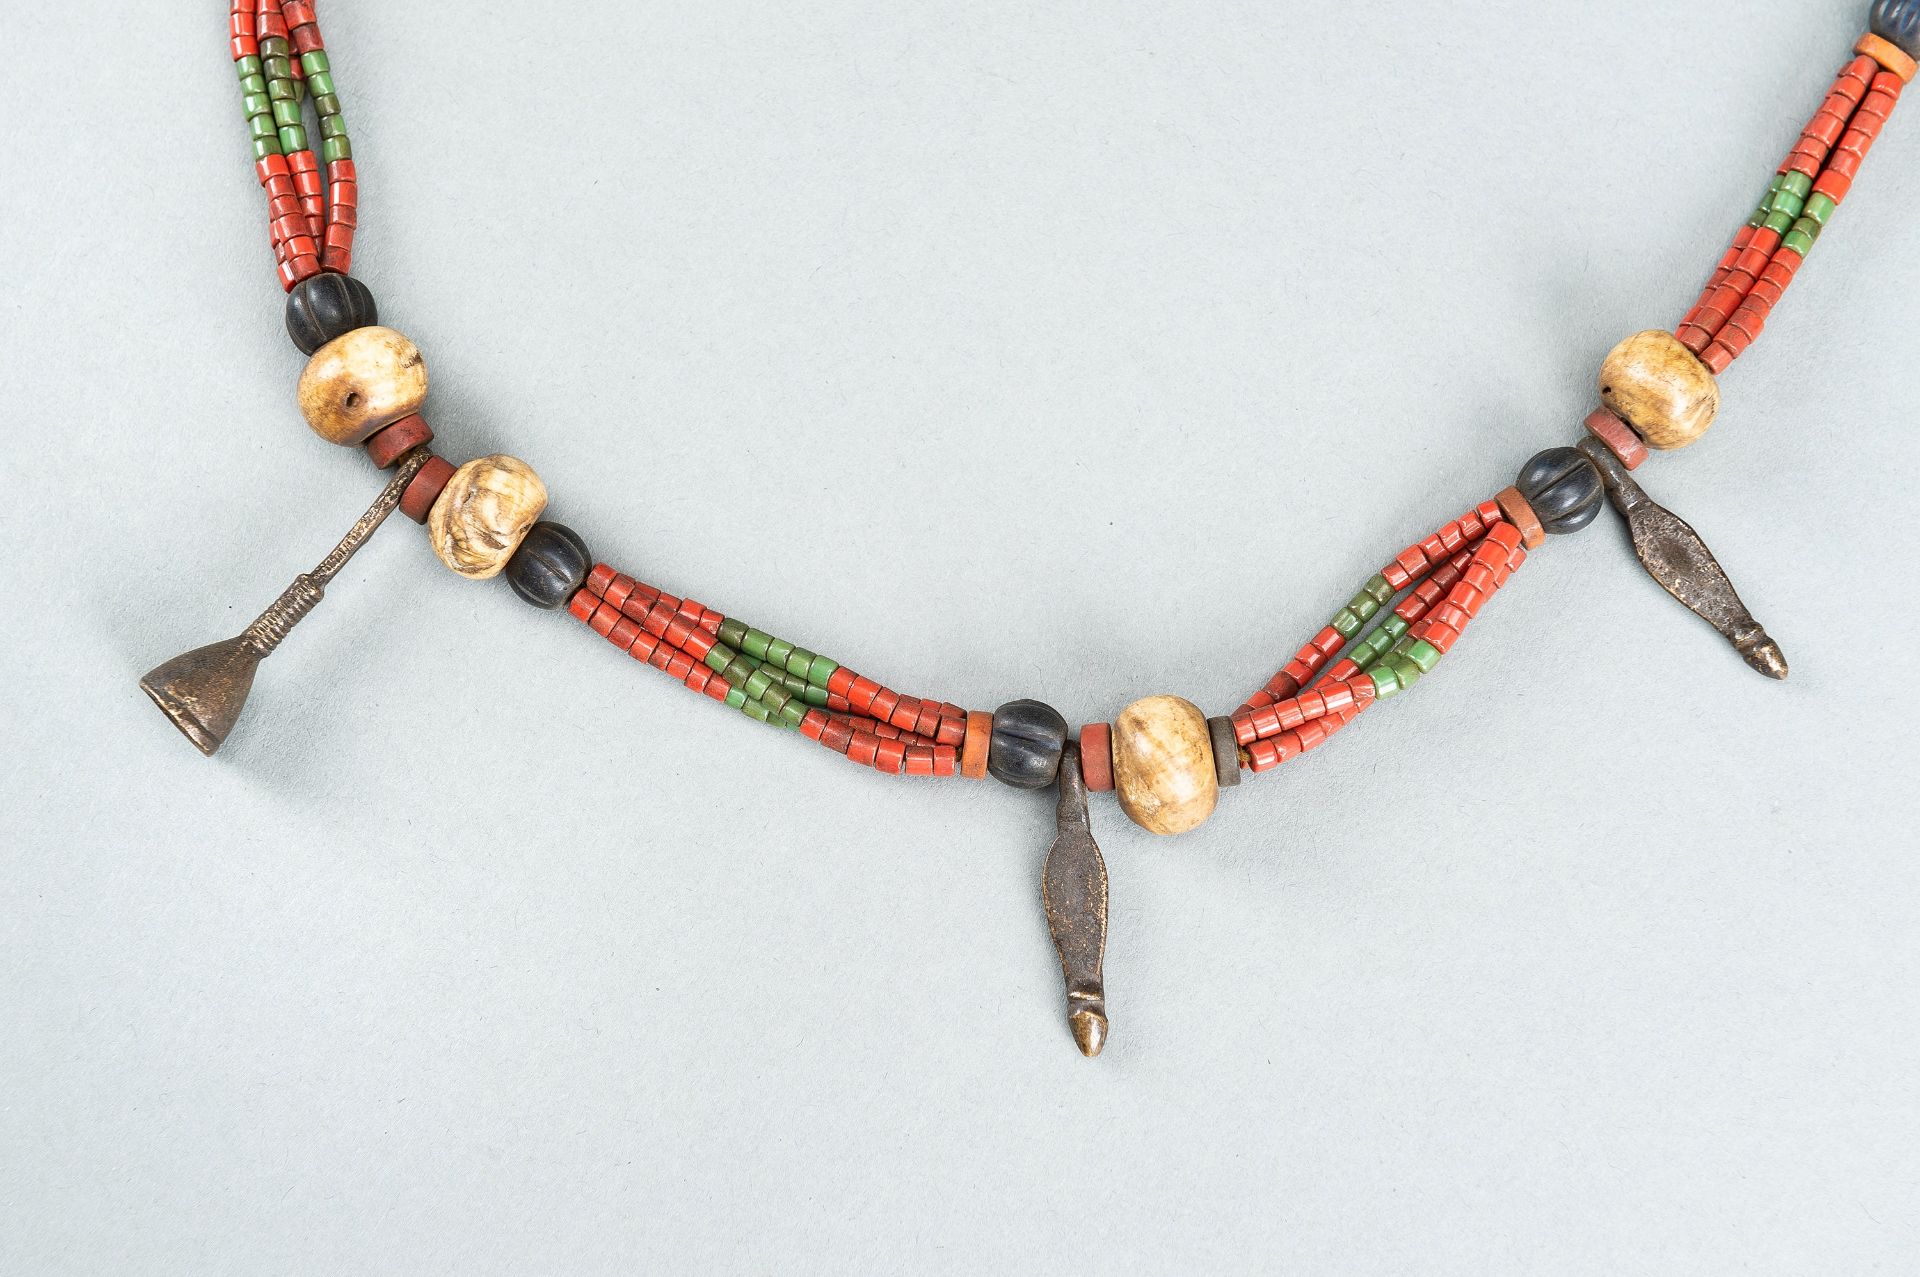 A NAGALAND MULTI-COLORED GLASS, BRASS AND SHELL NECKLACE, c. 1900s - Image 6 of 9